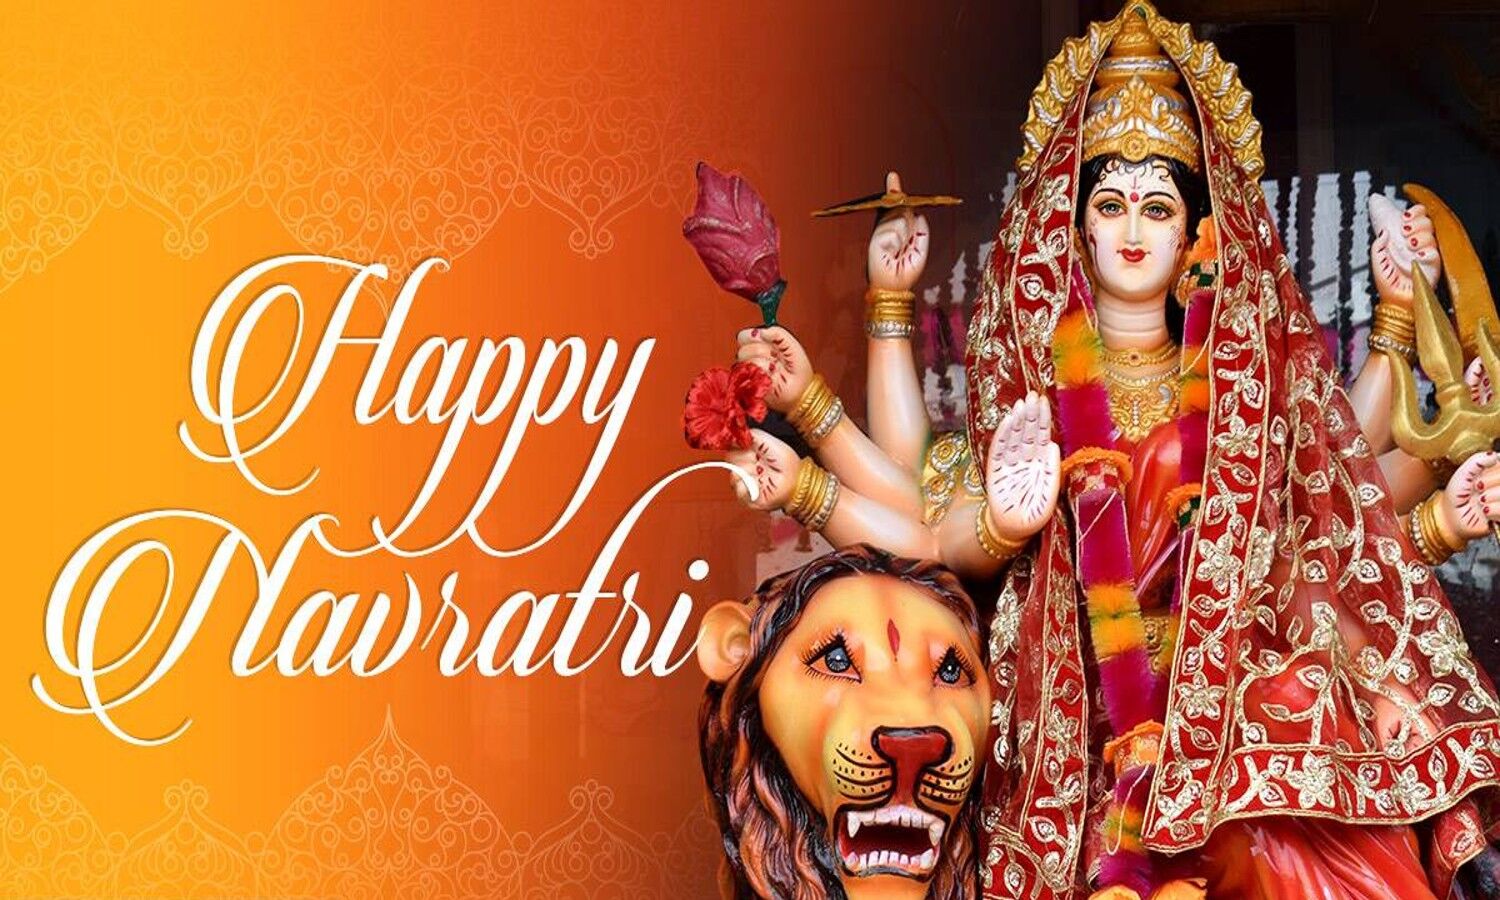 Happy Navratri 2022 Wishes: Send these messages of Mother Shakti in Navratri